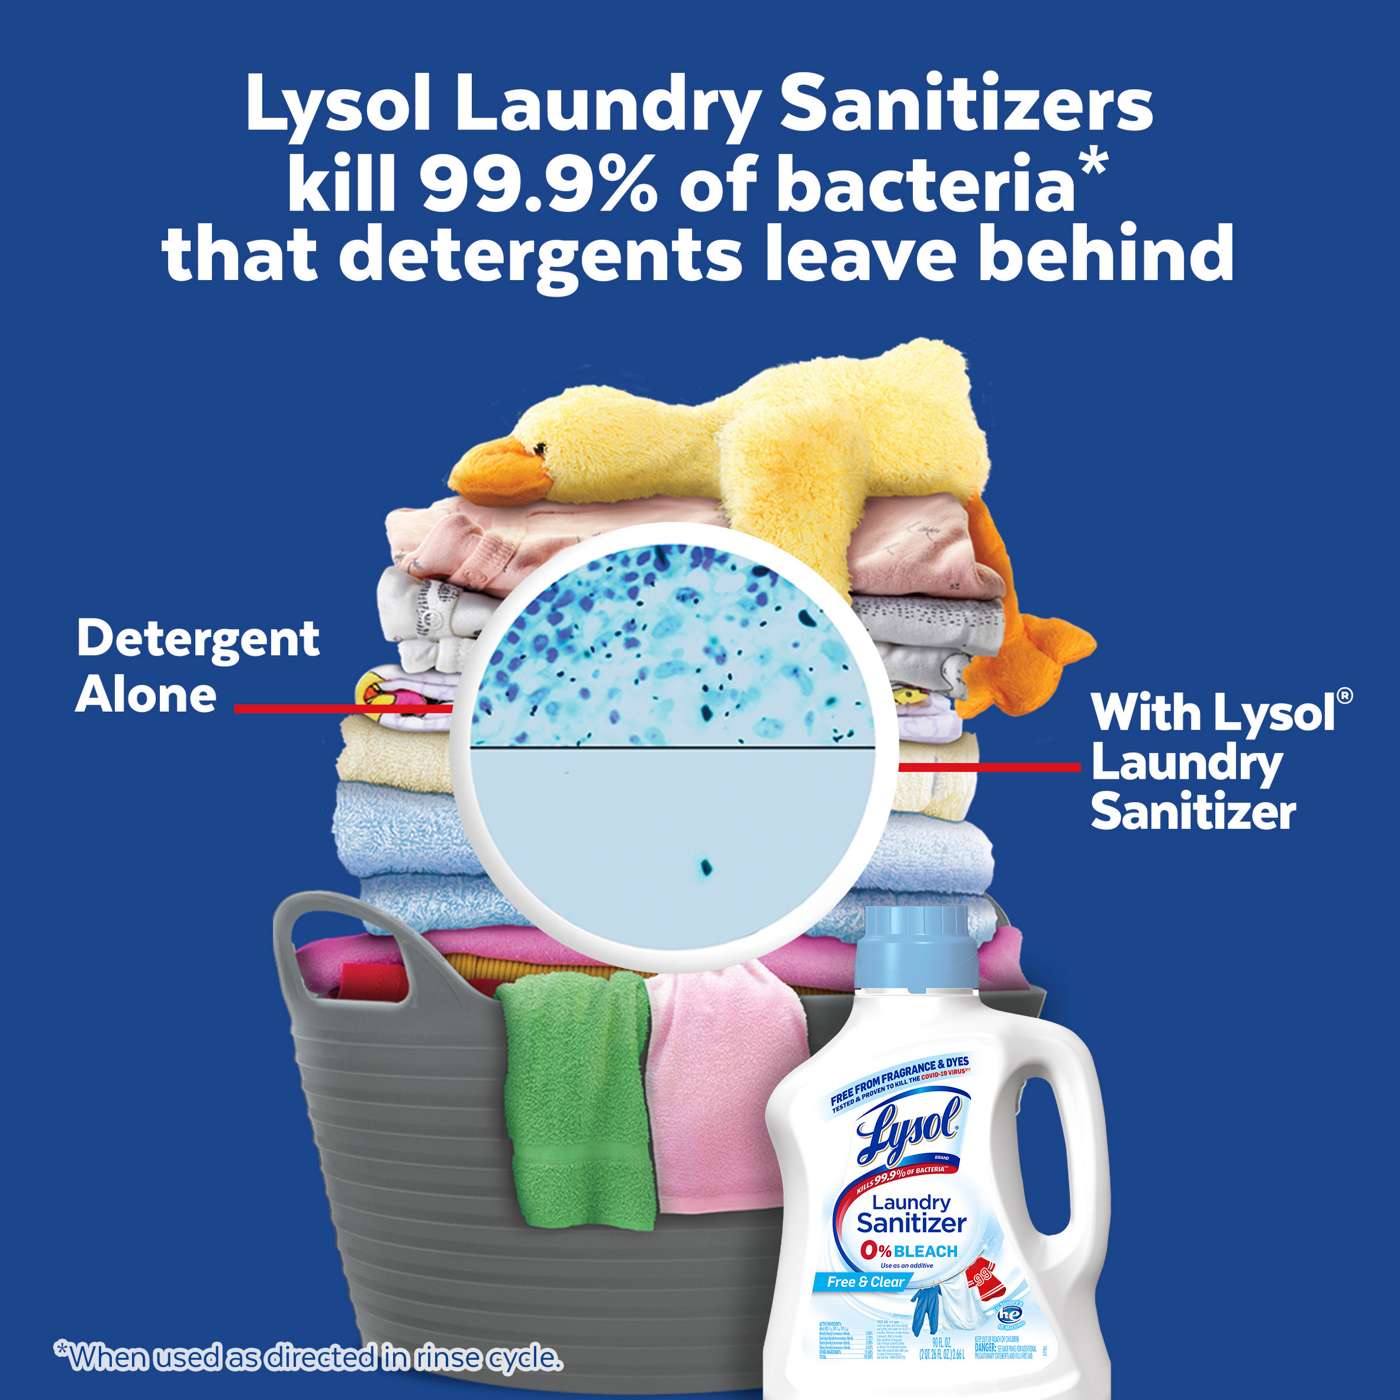 Lysol Free & Clear Laundry Sanitizer; image 2 of 2